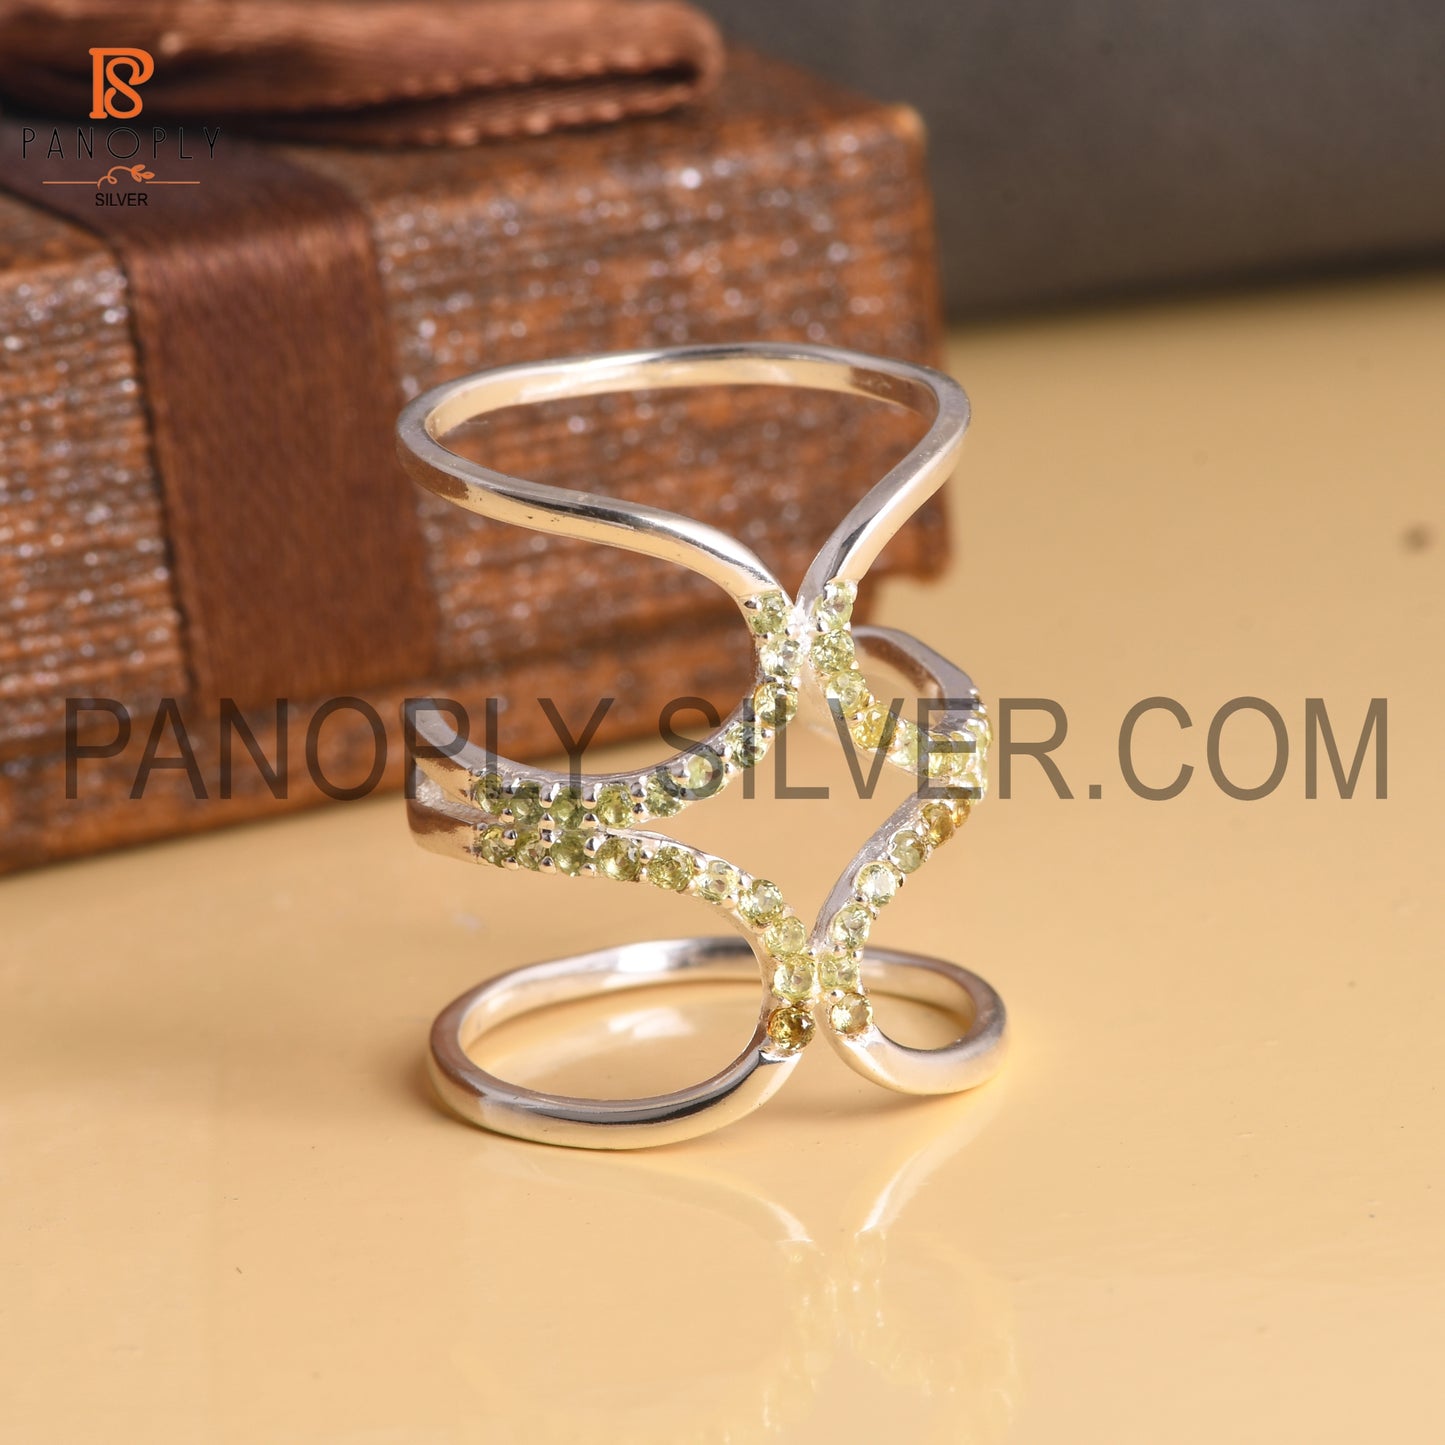 925 Sterling Silver Peridot Knuckle Joint Ring